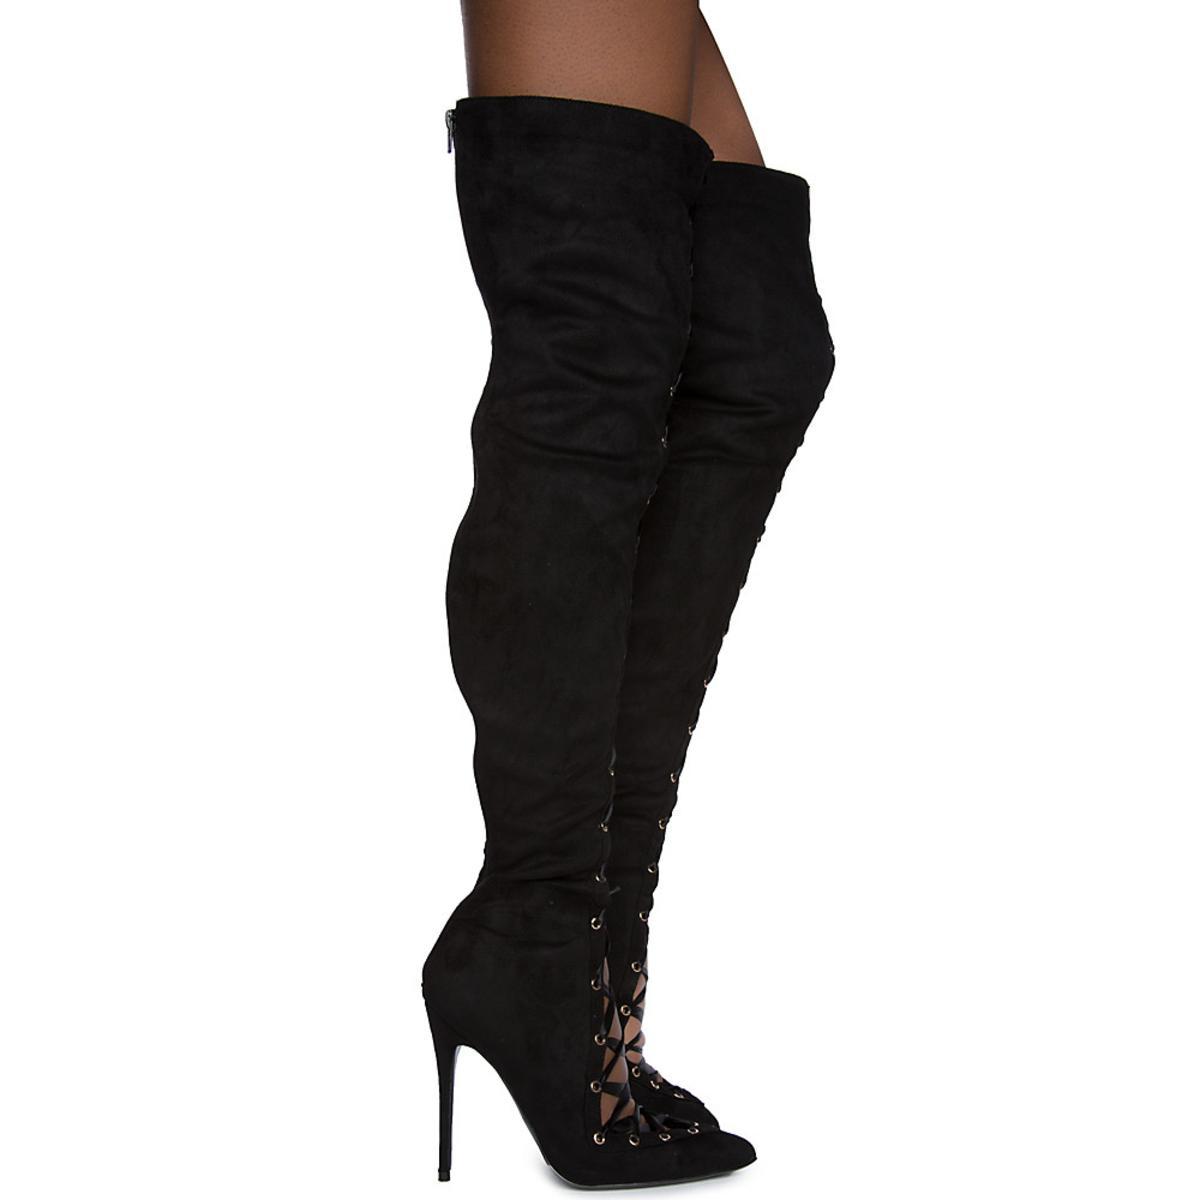 Jolly-6-S Over The Knee Boot BLACK